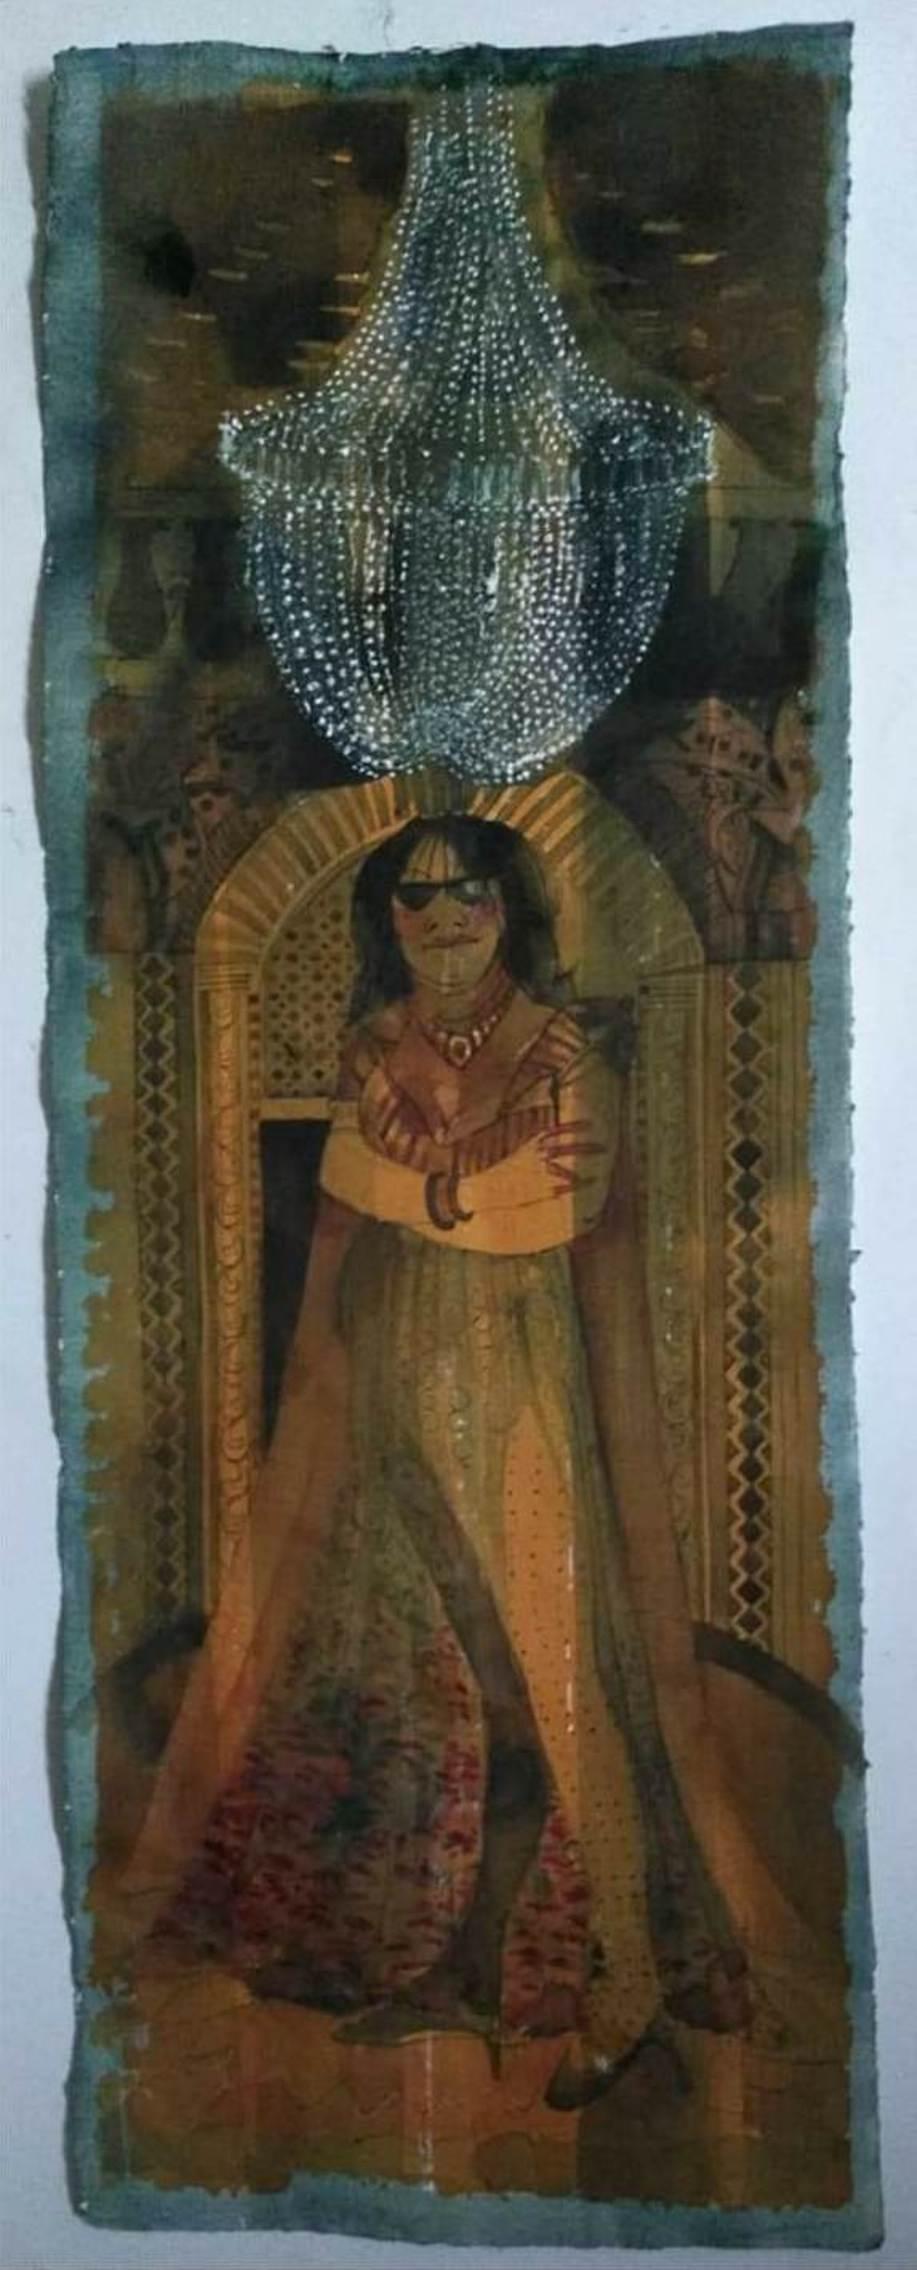 Rajeswar Rao
Untitled
Watercolour on Paper, 14 x 30 inches

Solo Shows
1996 Sakshi Gallery Bangalore
1997 Sakshi Gallery Mumbai
1998 Sakshi Gallery Mumbai
1998-9 Sakshi Gallery, Bangalore and Mumbai
2000 Gallery Espace New Delhi
2003. Alankritha art